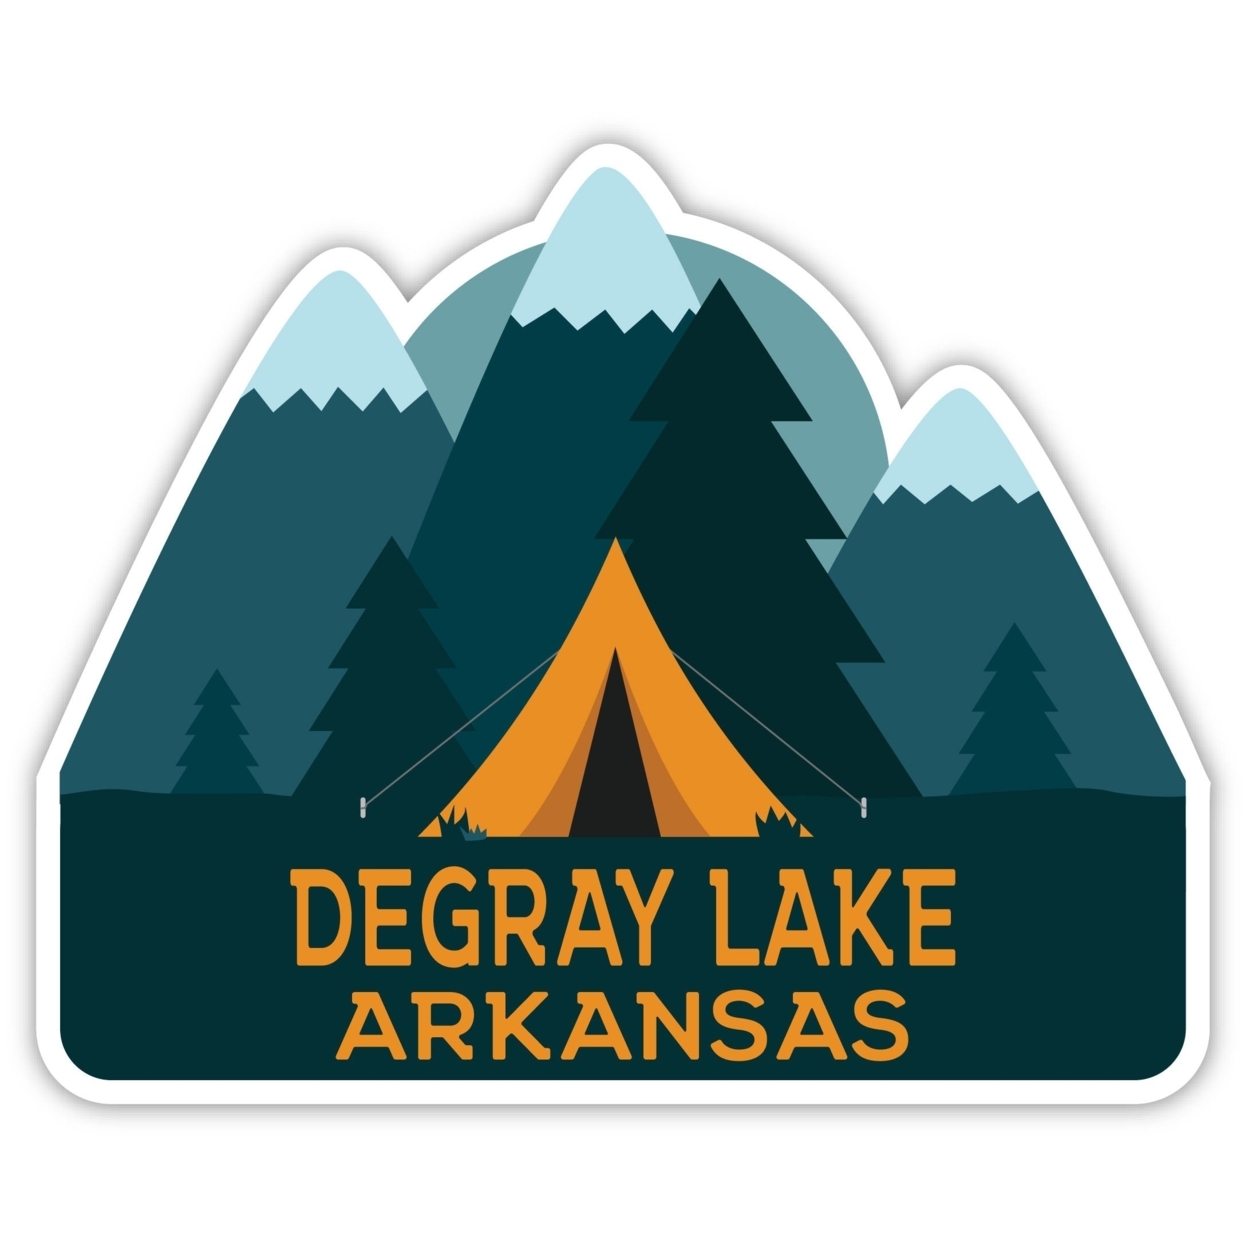 DeGray Lake Arkansas Souvenir Decorative Stickers (Choose Theme And Size) - 4-Pack, 4-Inch, Tent